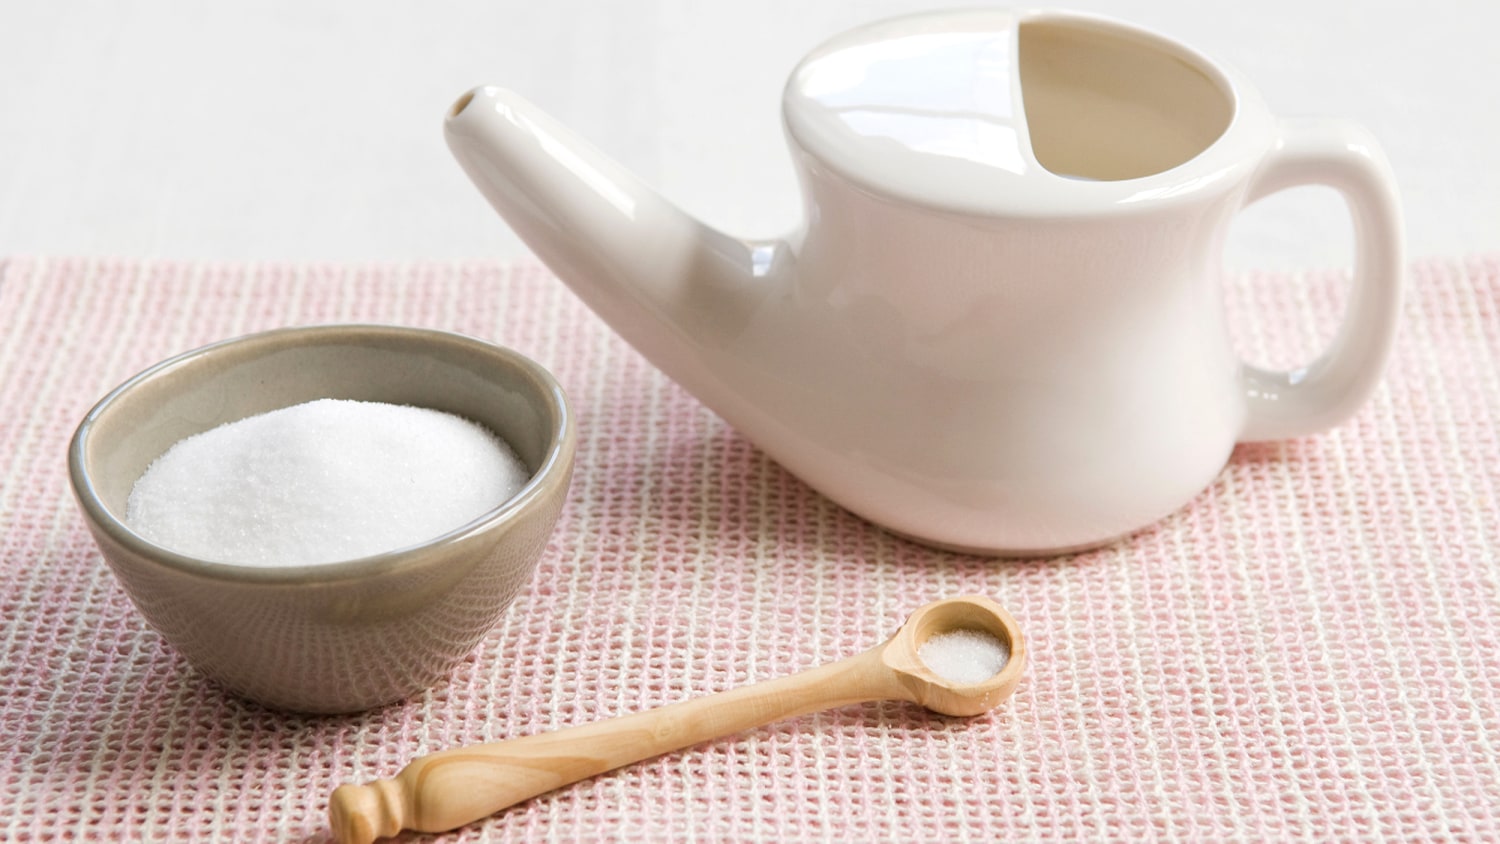 How to Use a Neti Pot, According to Doctors